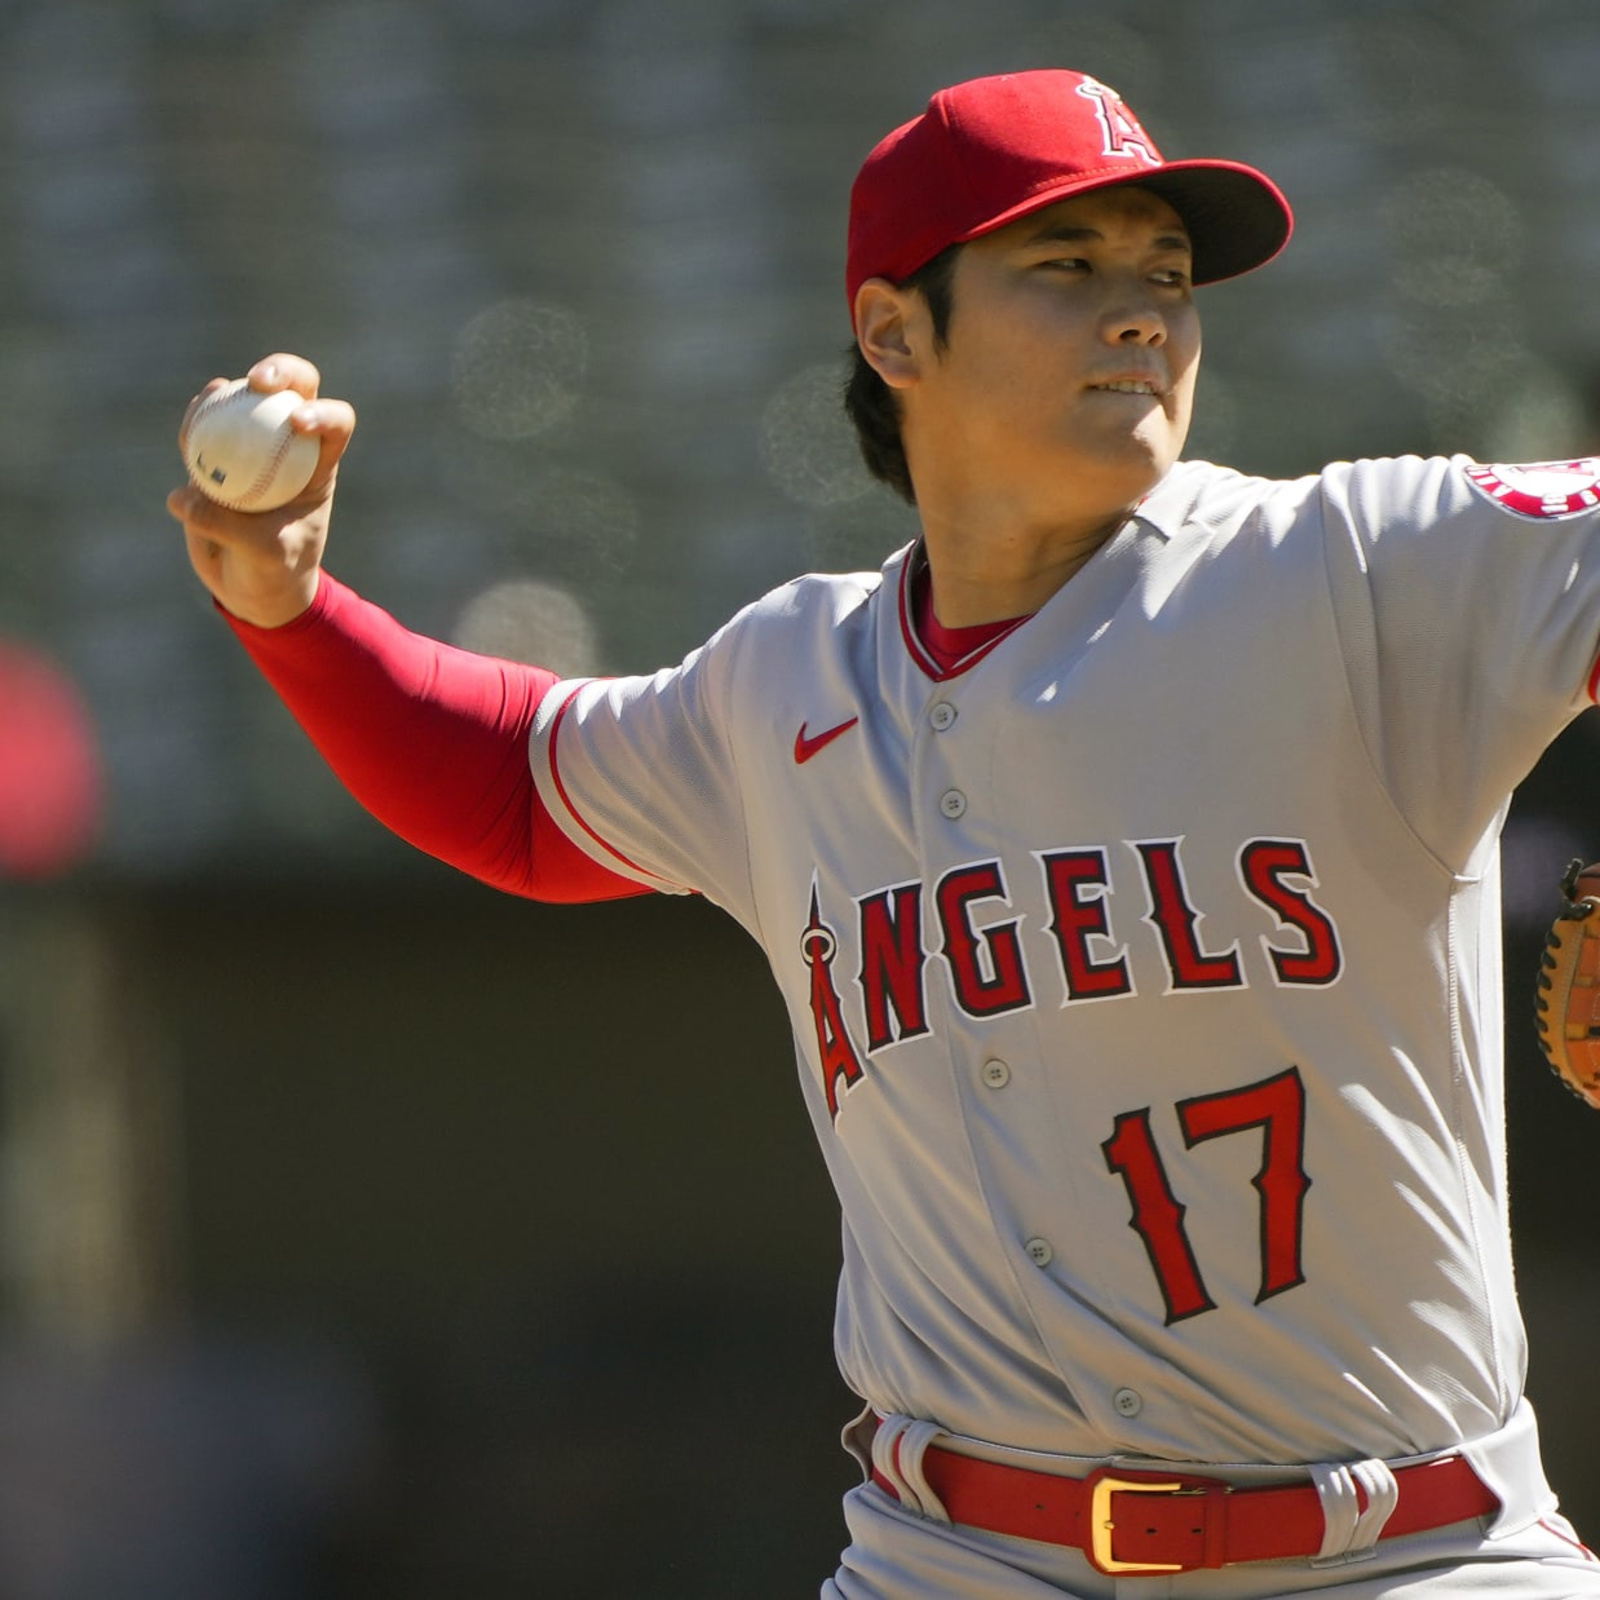 2023 Shohei Ohtani Game Used White Jersey - Pitching Start + HR #17, Career  HR #144 (6/8 + 6/9/23)